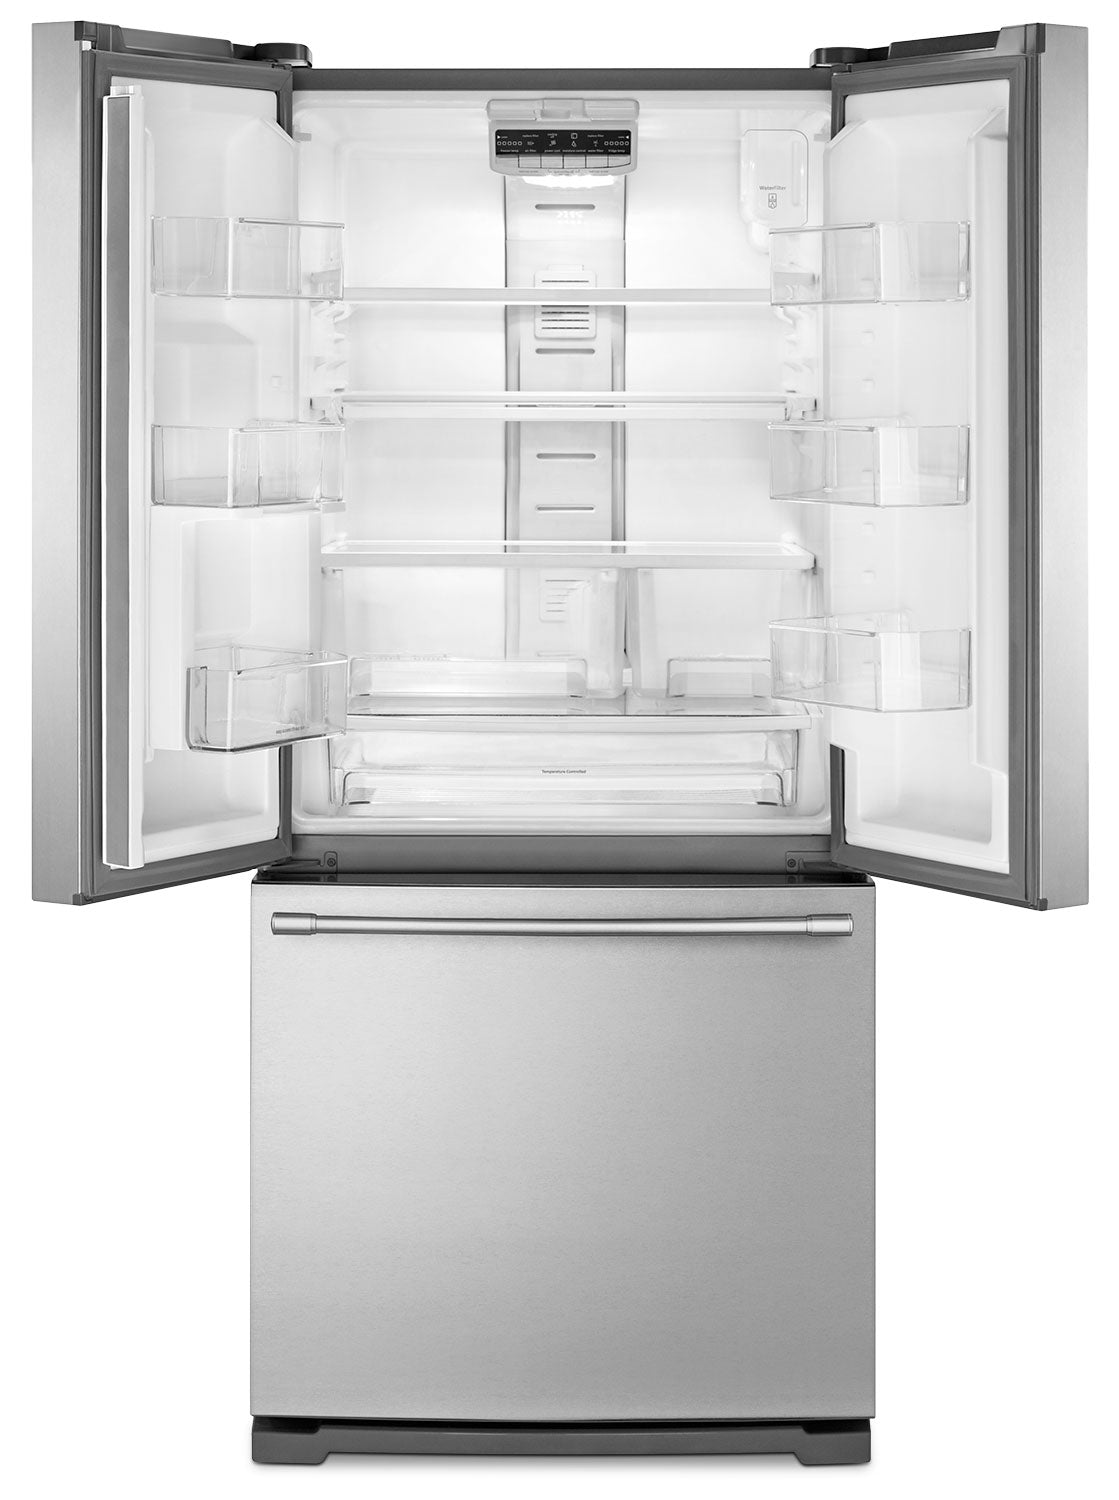 Maytag Stainless Steel  French Door Refrigerator (19.6 Cu. Ft.) - MFB2055FRZ